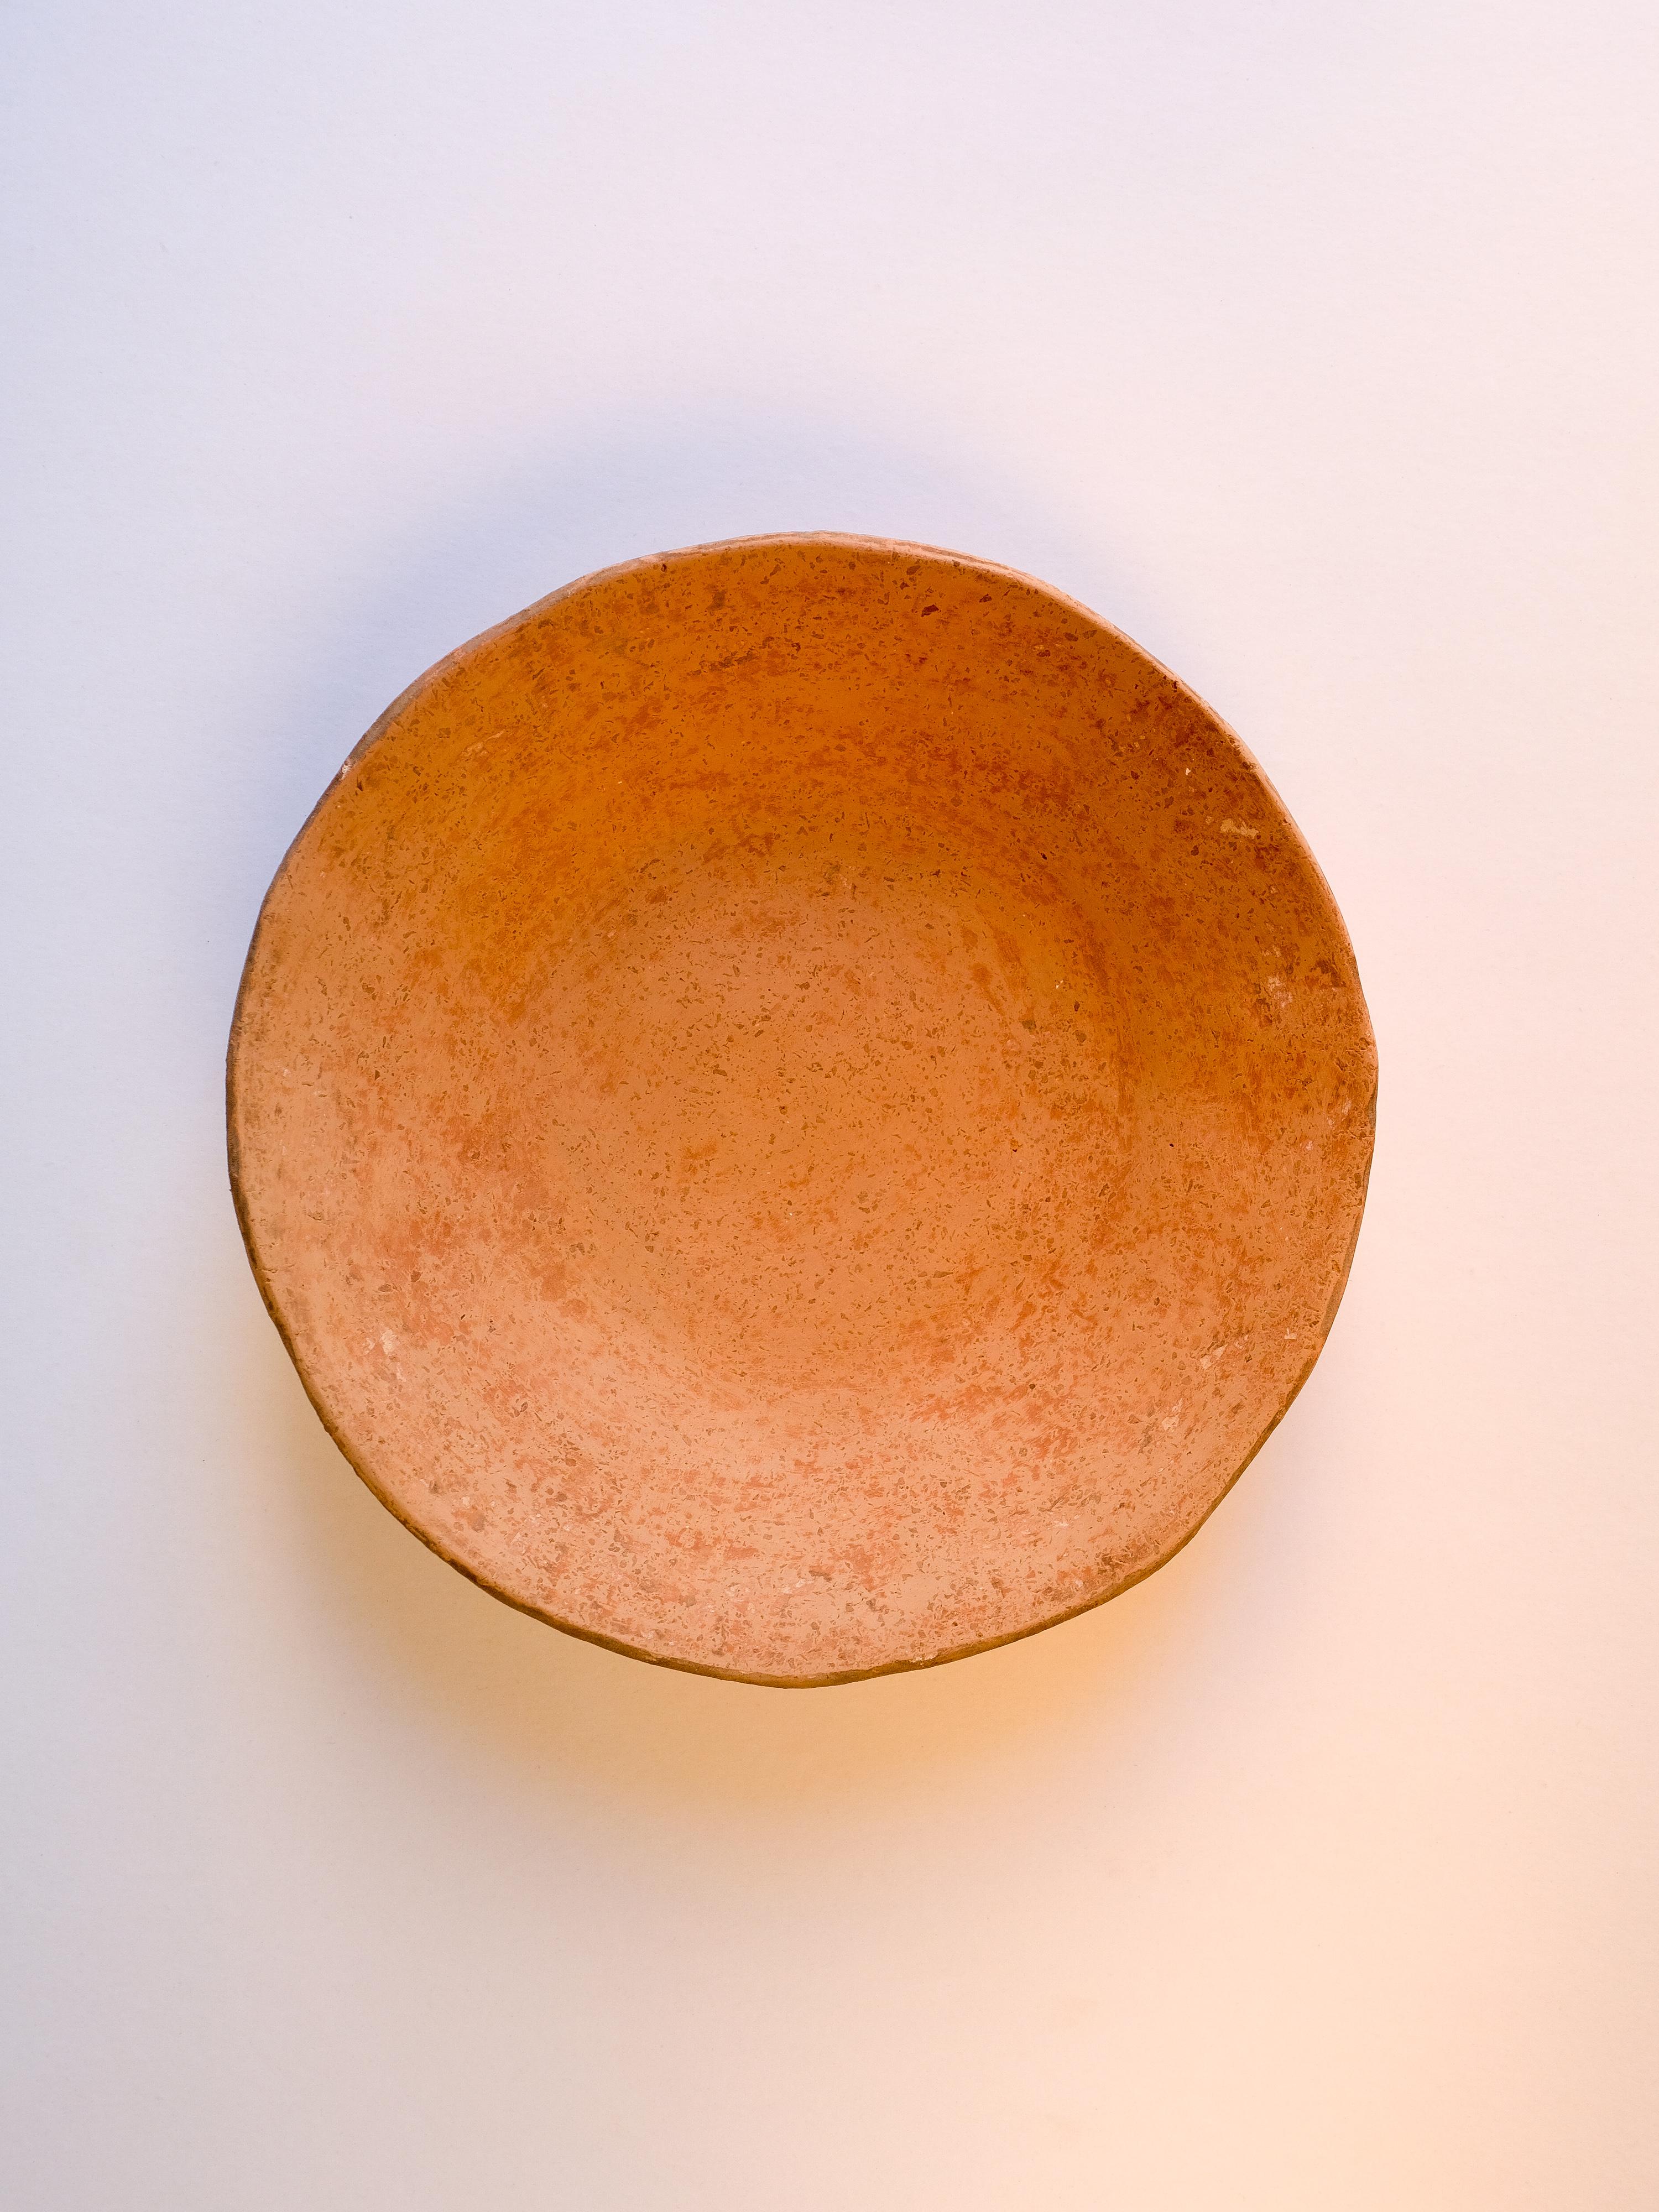 - Handbuilt freckles terracotta small decorative plate
- made of clay collected from the potter's surroundings.
- made in the Moroccan Rif mountains by the potter Fatima.

Approximate measurements: Ø 10.6 x 2 in // Ø 27 x 5 cm 

Handmade: